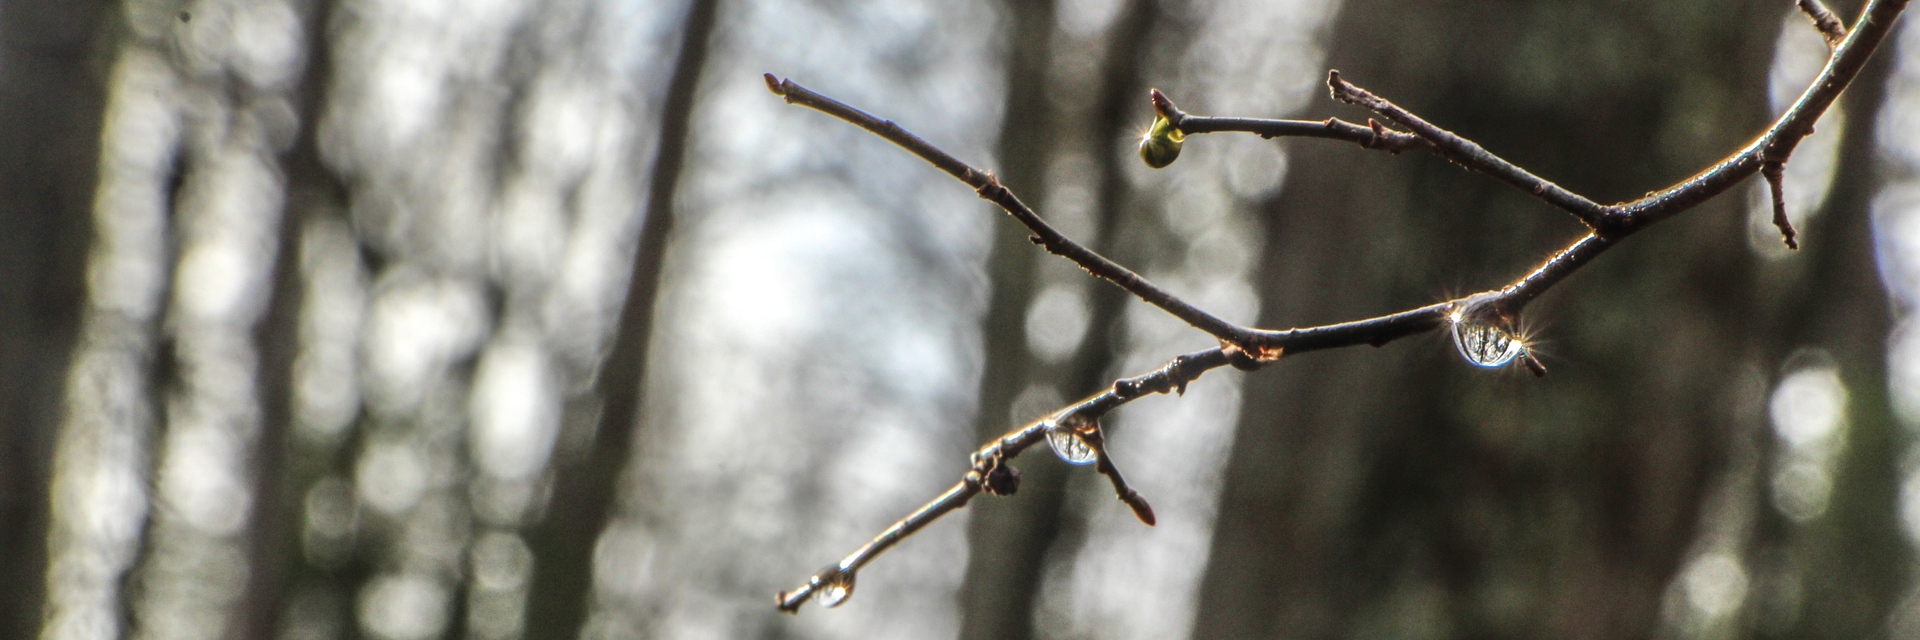 branch with dew drop